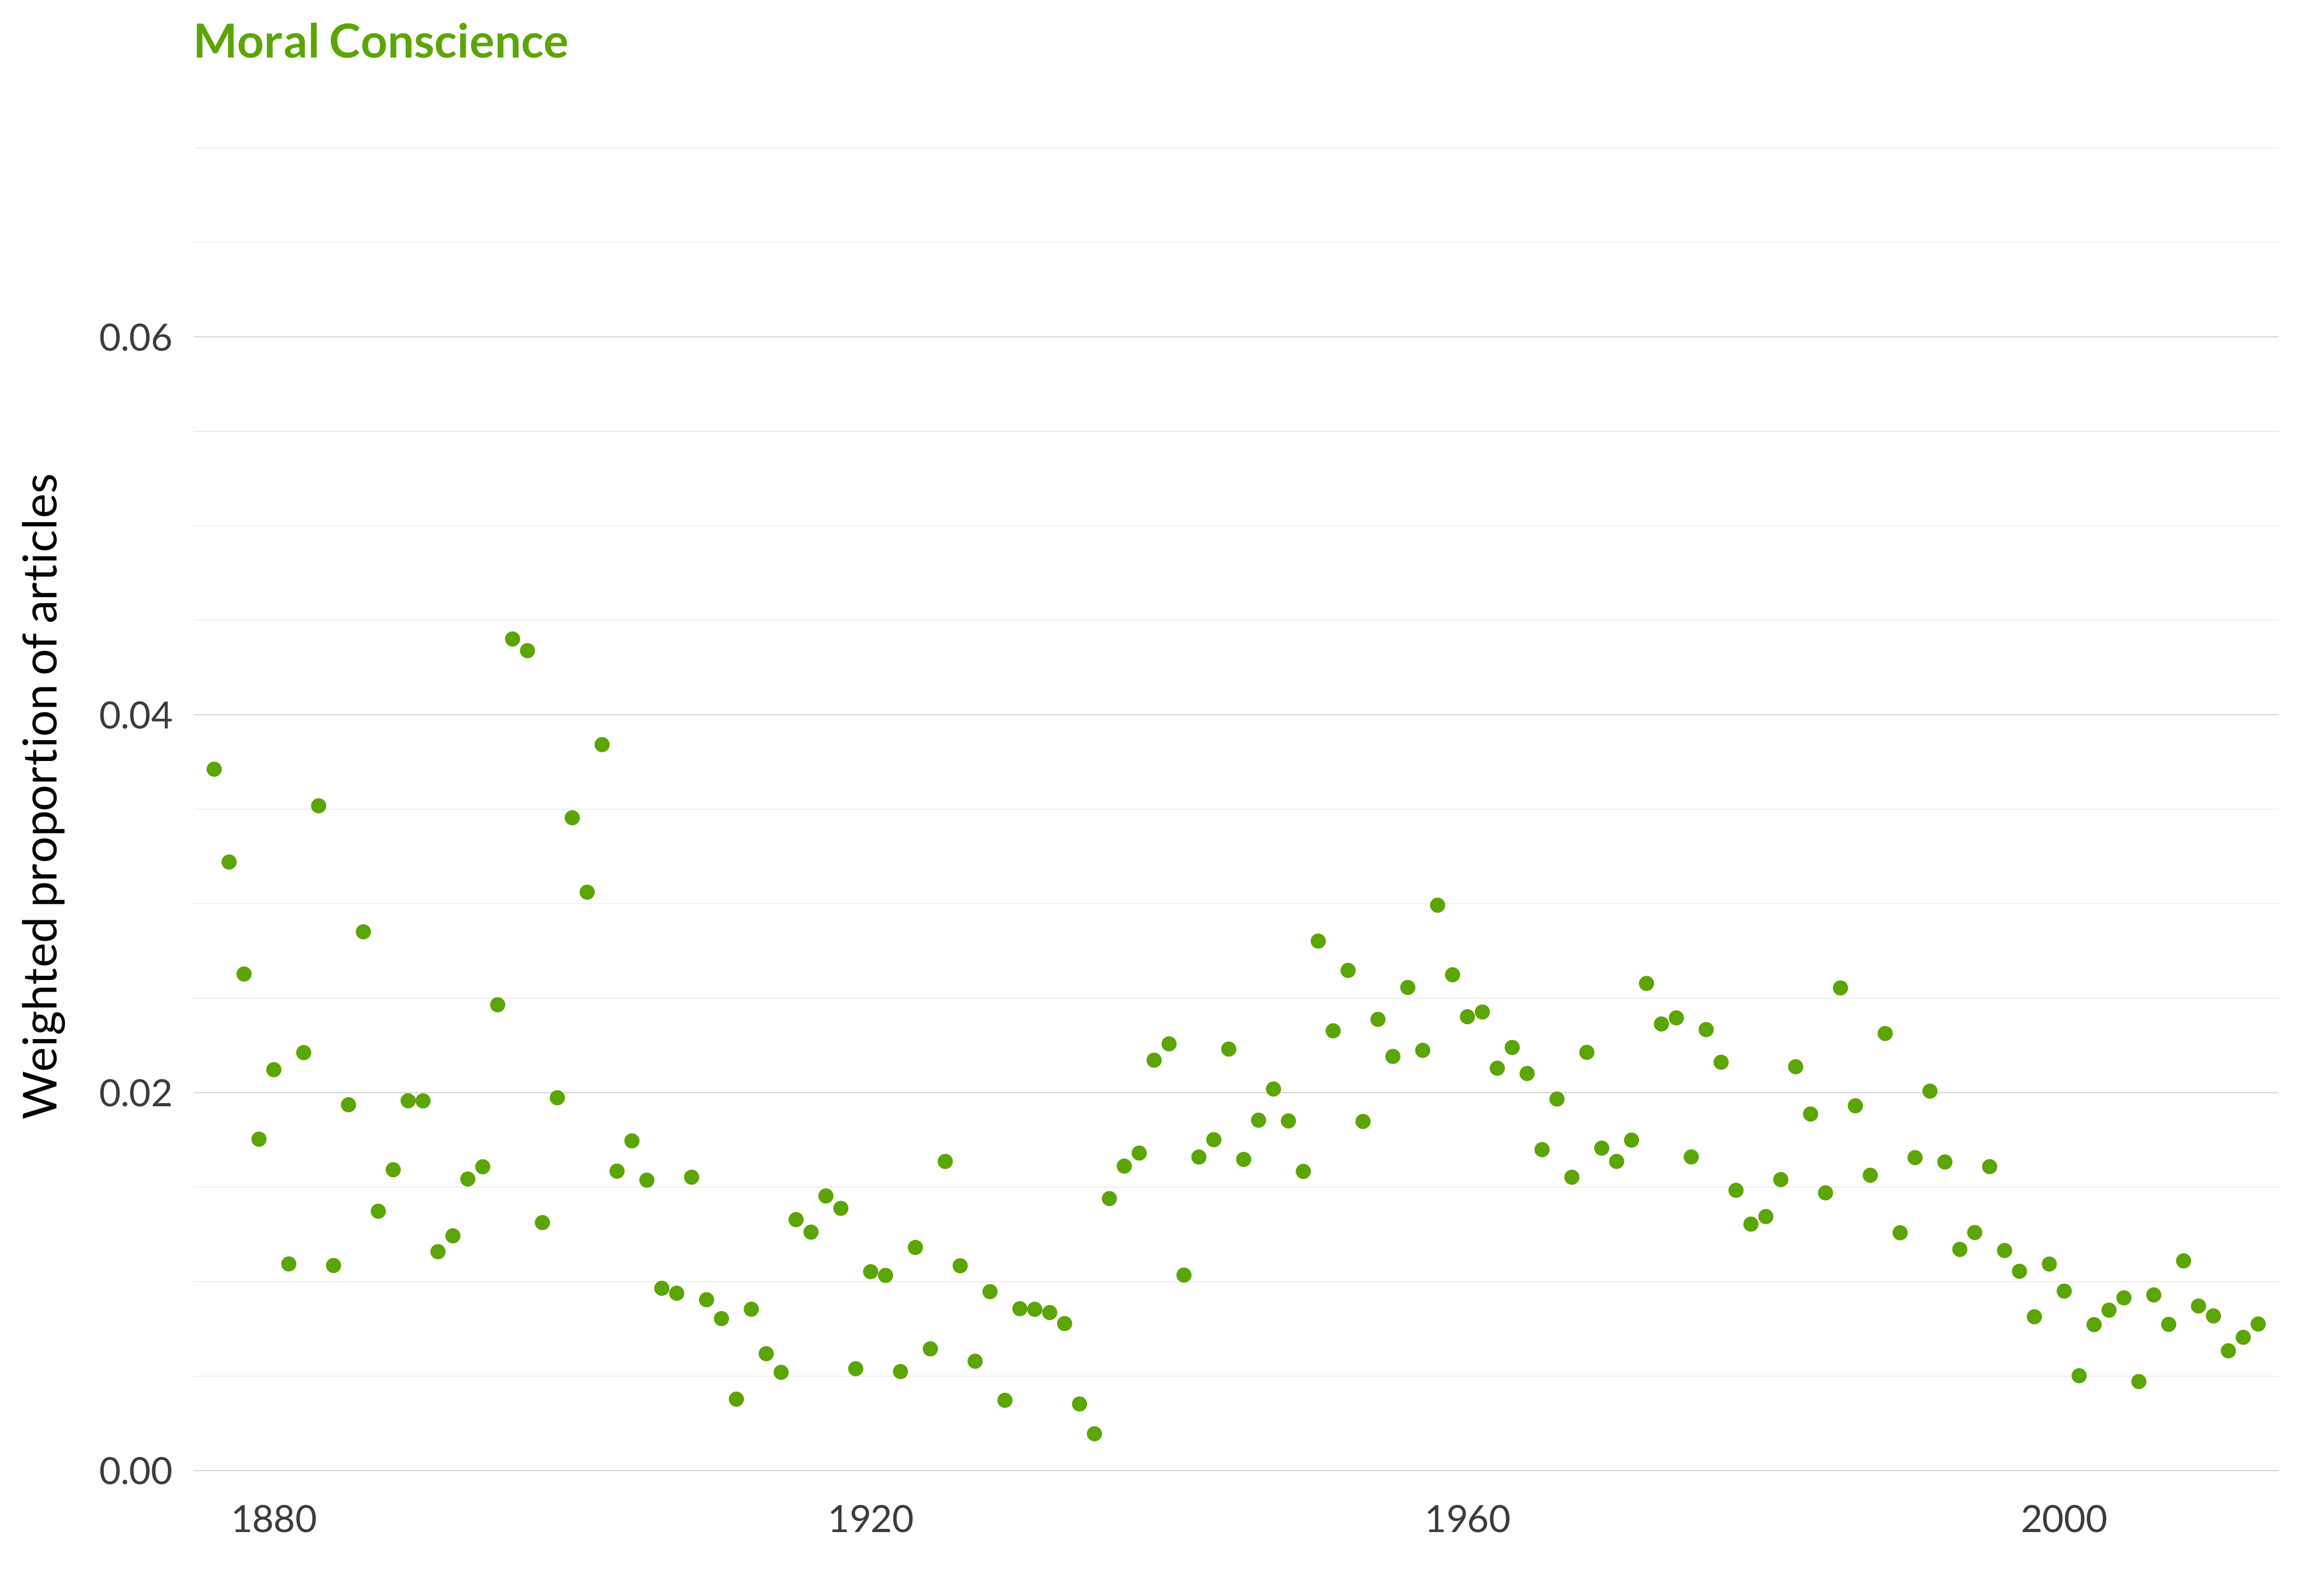 A scatterplot showing which proportion of articles each year are in the moral consciencetopic. The x-axis shows the year, the y-axis measures the proportion of articles each year in this topic. There is one dot per year. The highest value is in 1896 when 4.4% of articles were in this topic. The lowest value is in 1935 when 0.2% of articles were in this topic. The full table that provides the data for this graph is available in Table A.25 in Appendix A.